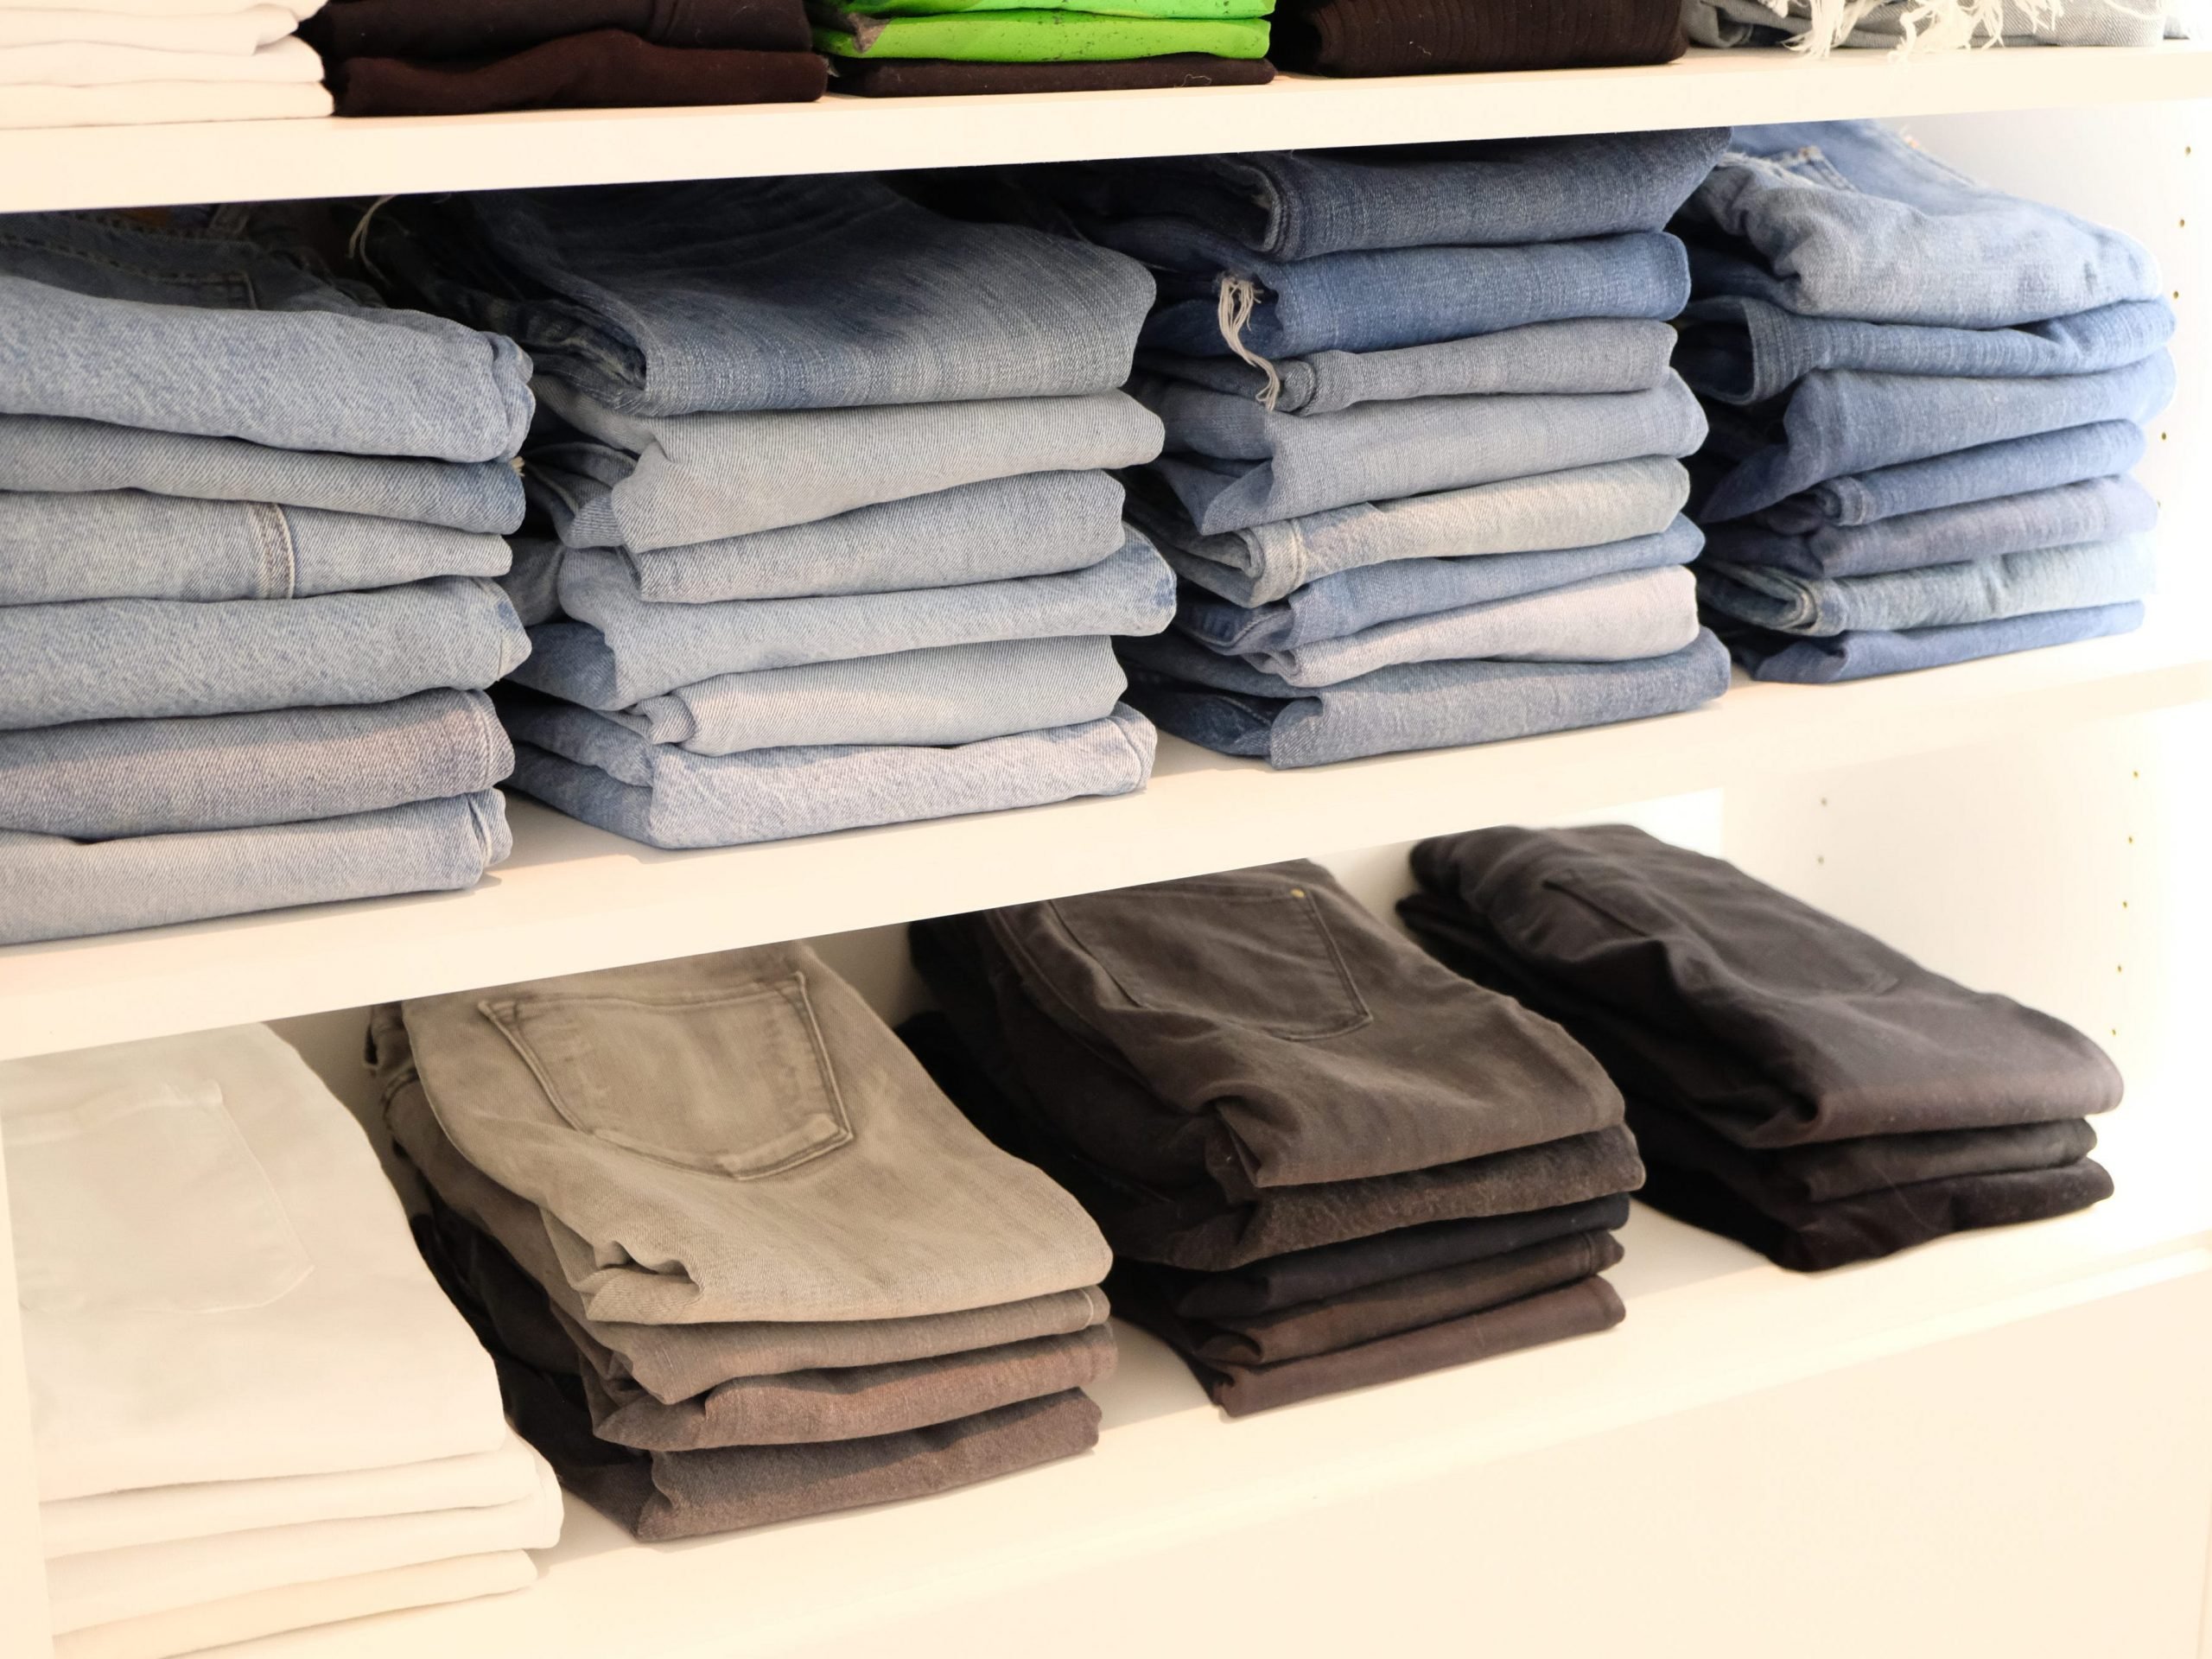 Jeans and pants folded and stacked on closet shelves